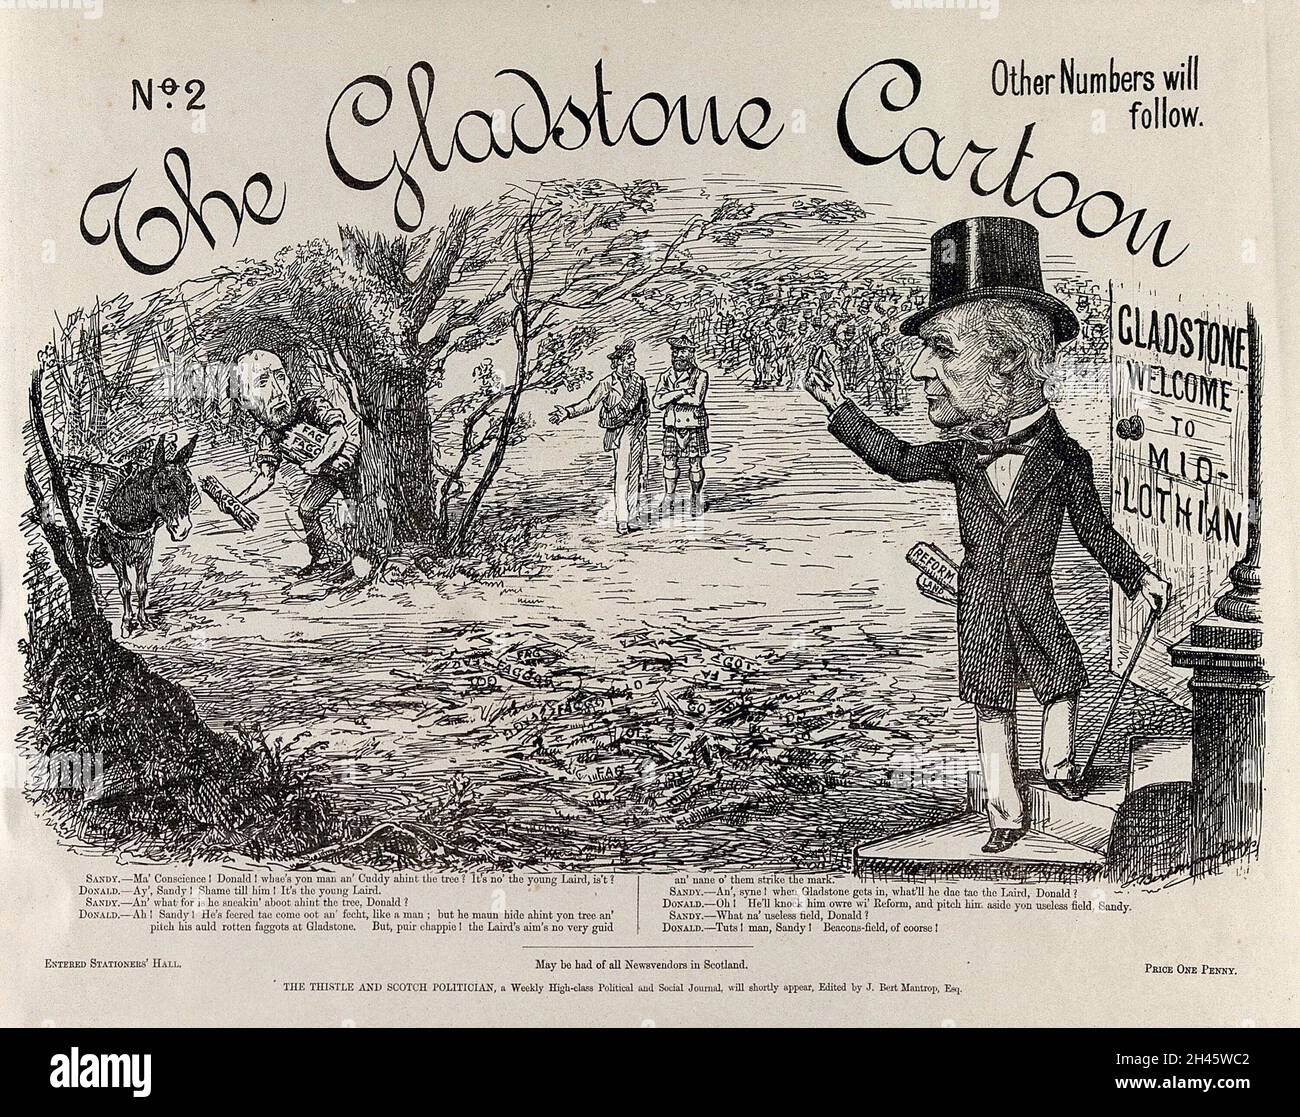 The Midlothian campaign of 1879-1880: William Gladstone is saluting a crowd; his opponent the Earl of Dalkeith is hiding behind a tree in order to throw faggots at him. Engraving by A. Mantrop, 1879/1880. Stock Photo